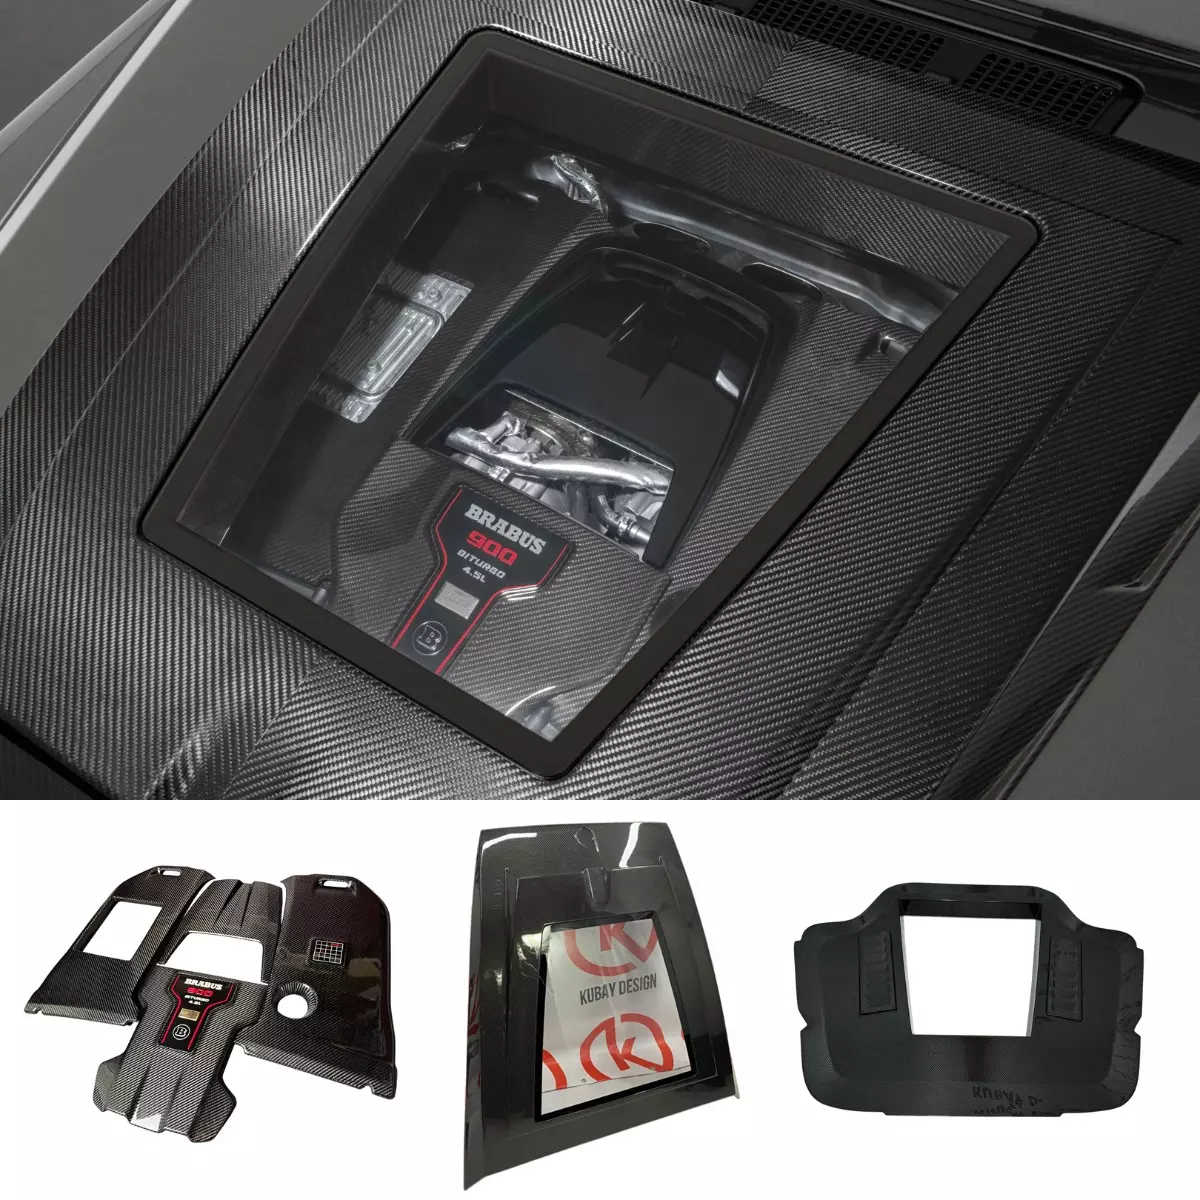 Brabus 900 Carbon Fiber Hood Cover + Hood Under Cover + Engine Cover for W463A G-Class